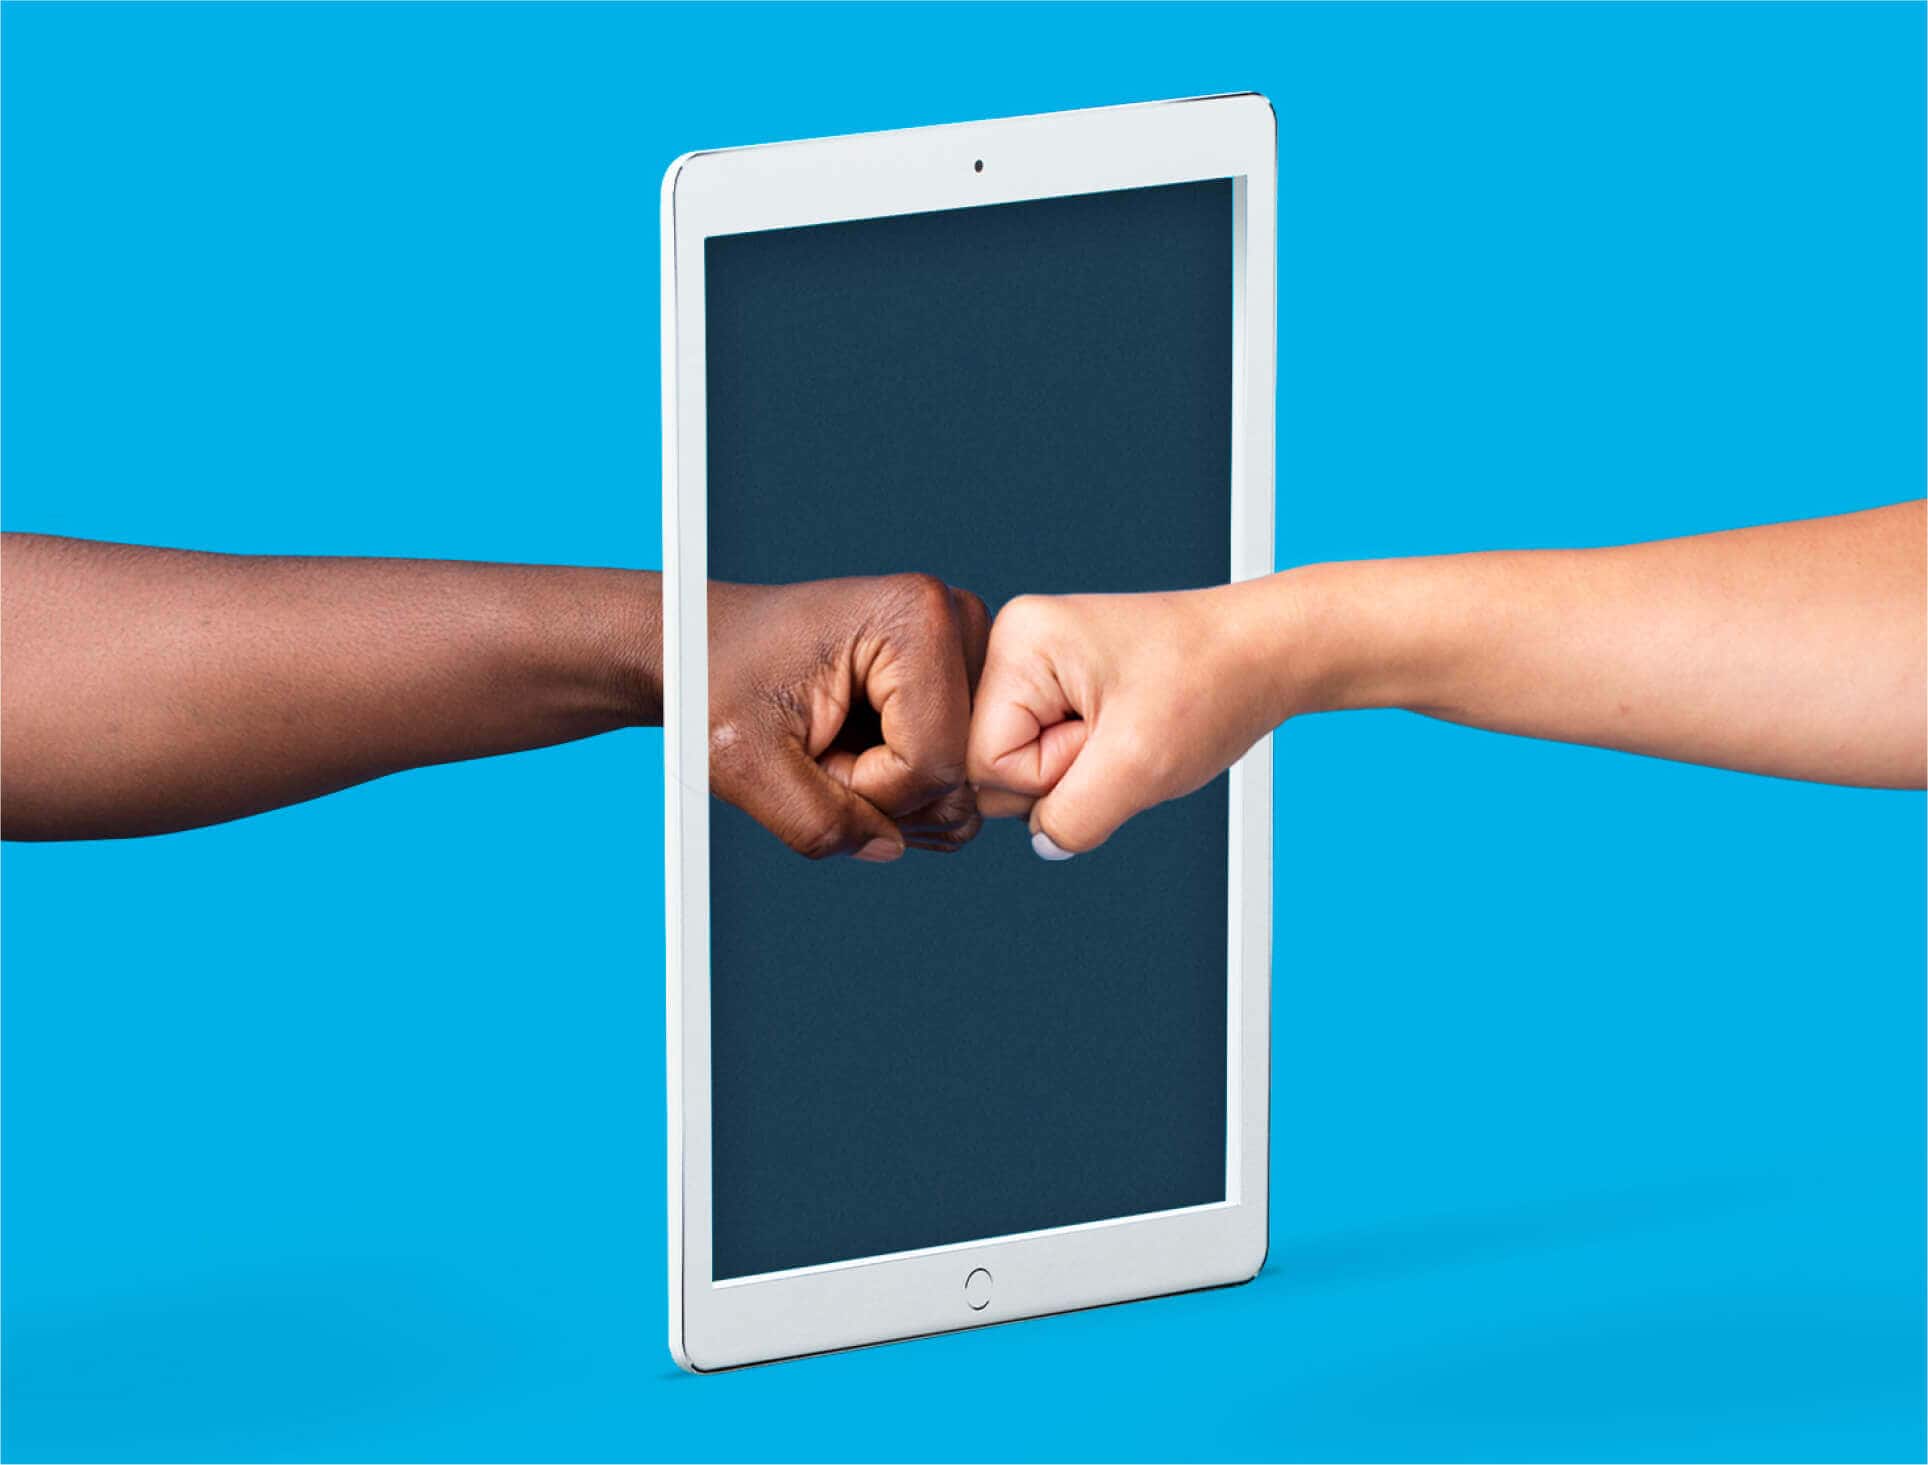 Two hands fist bump through a device to show that eInvoicing is instant, direct and electronic.